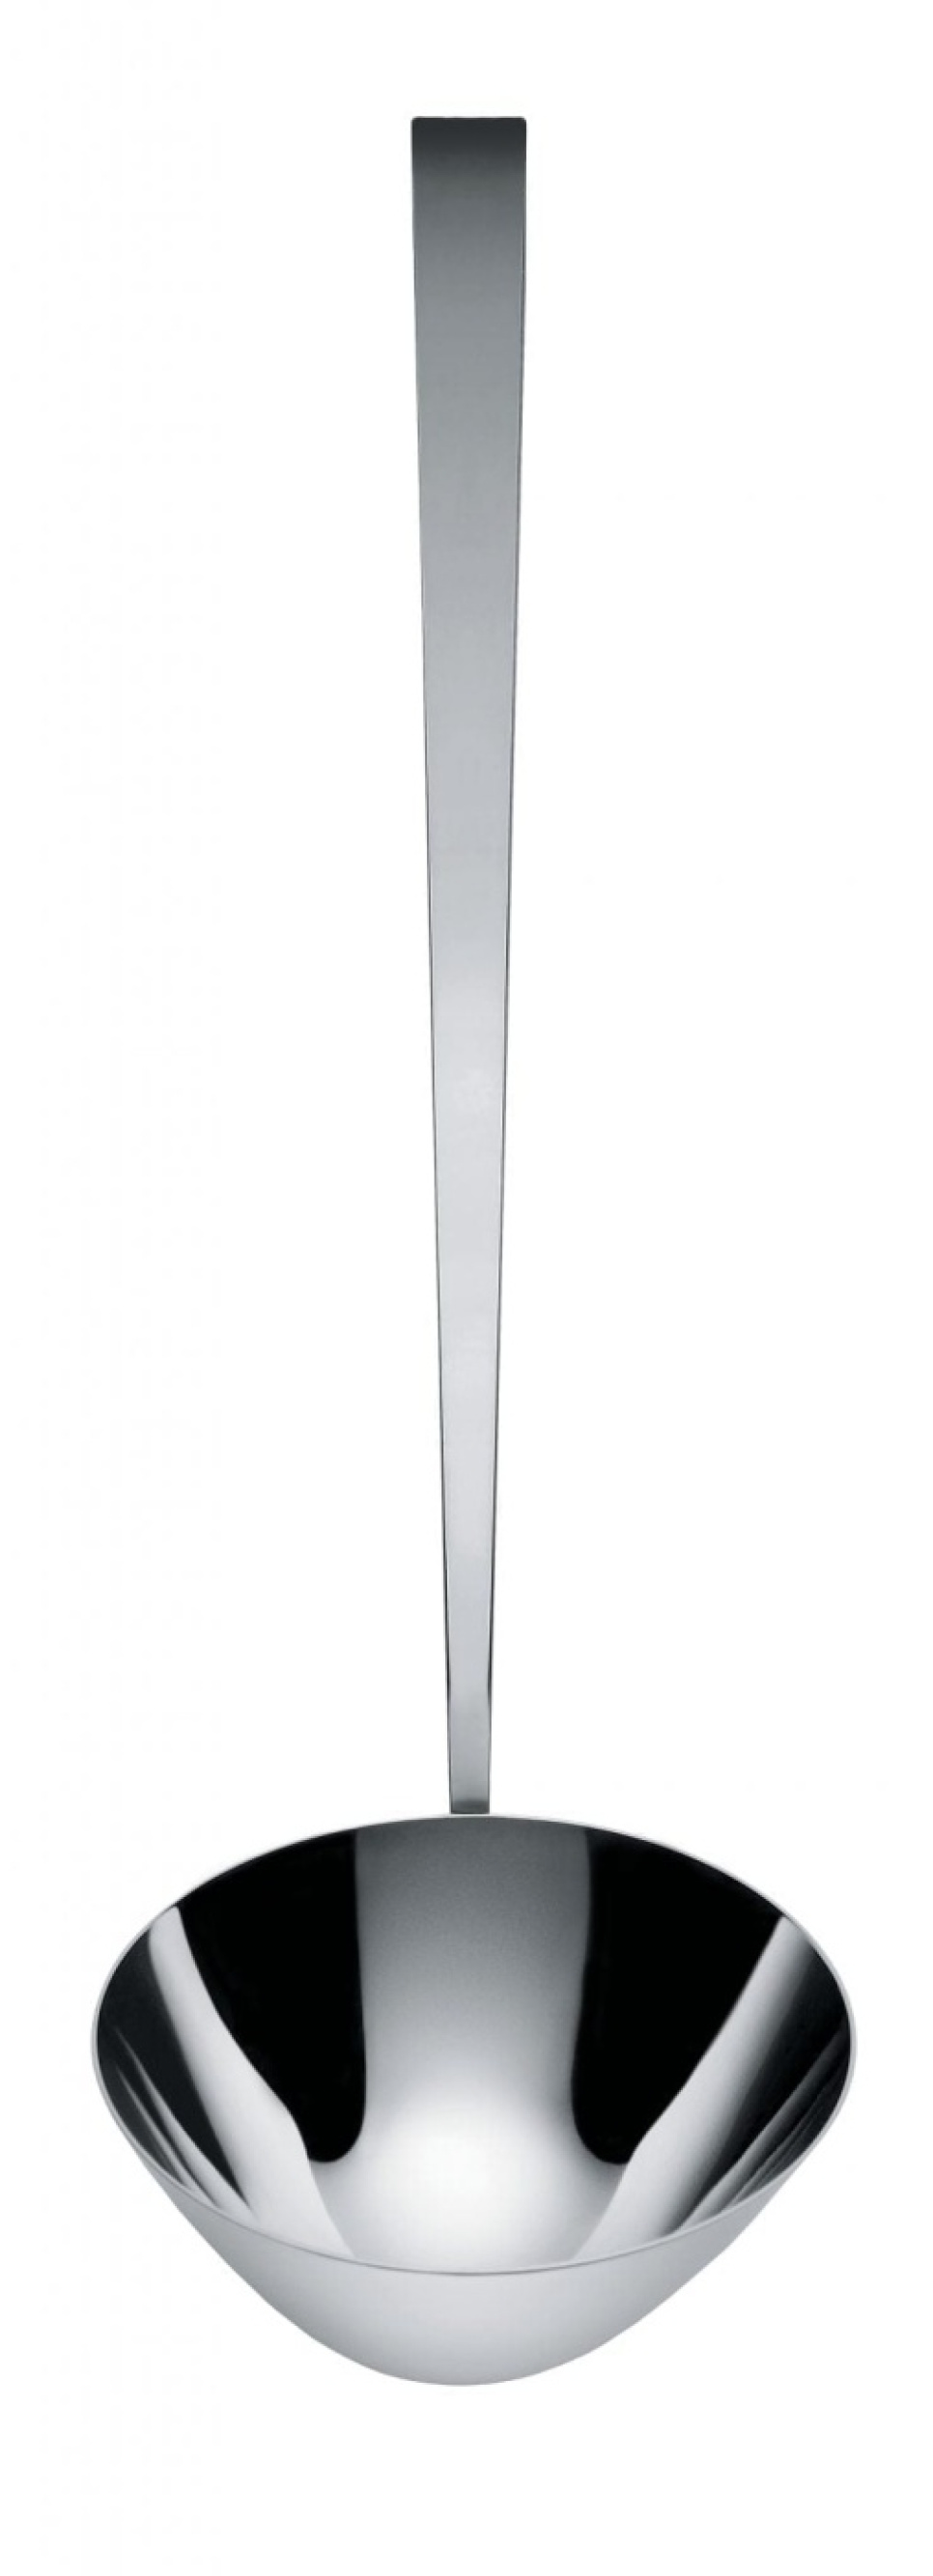 Sauce ladle 35.7 cm, Loochtootoo - Alessi in the group Table setting / Cutlery / Serving utensils at KitchenLab (1466-16606)